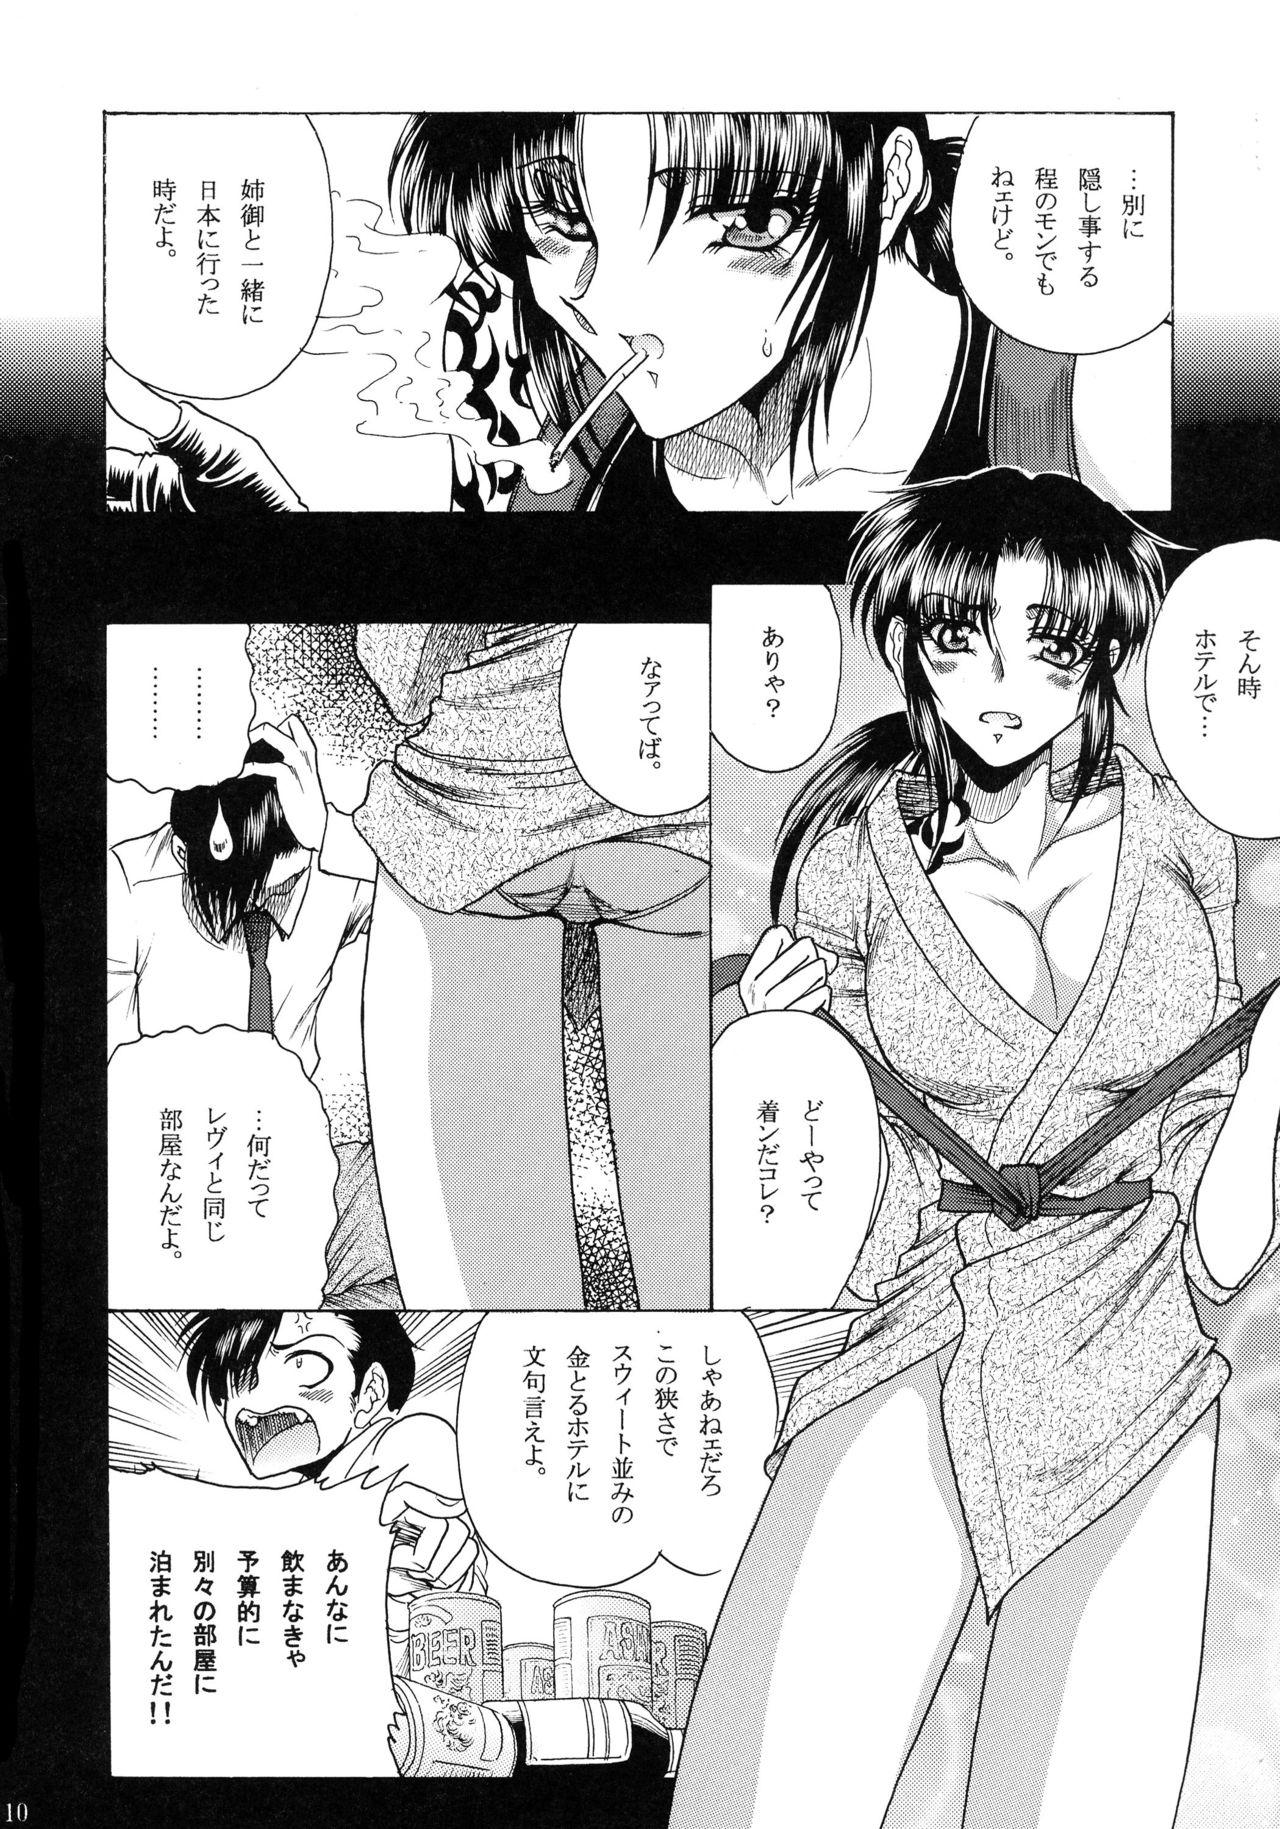 Best Blowjob ZONE 38 China Syndrome - Black lagoon Emo - Page 9